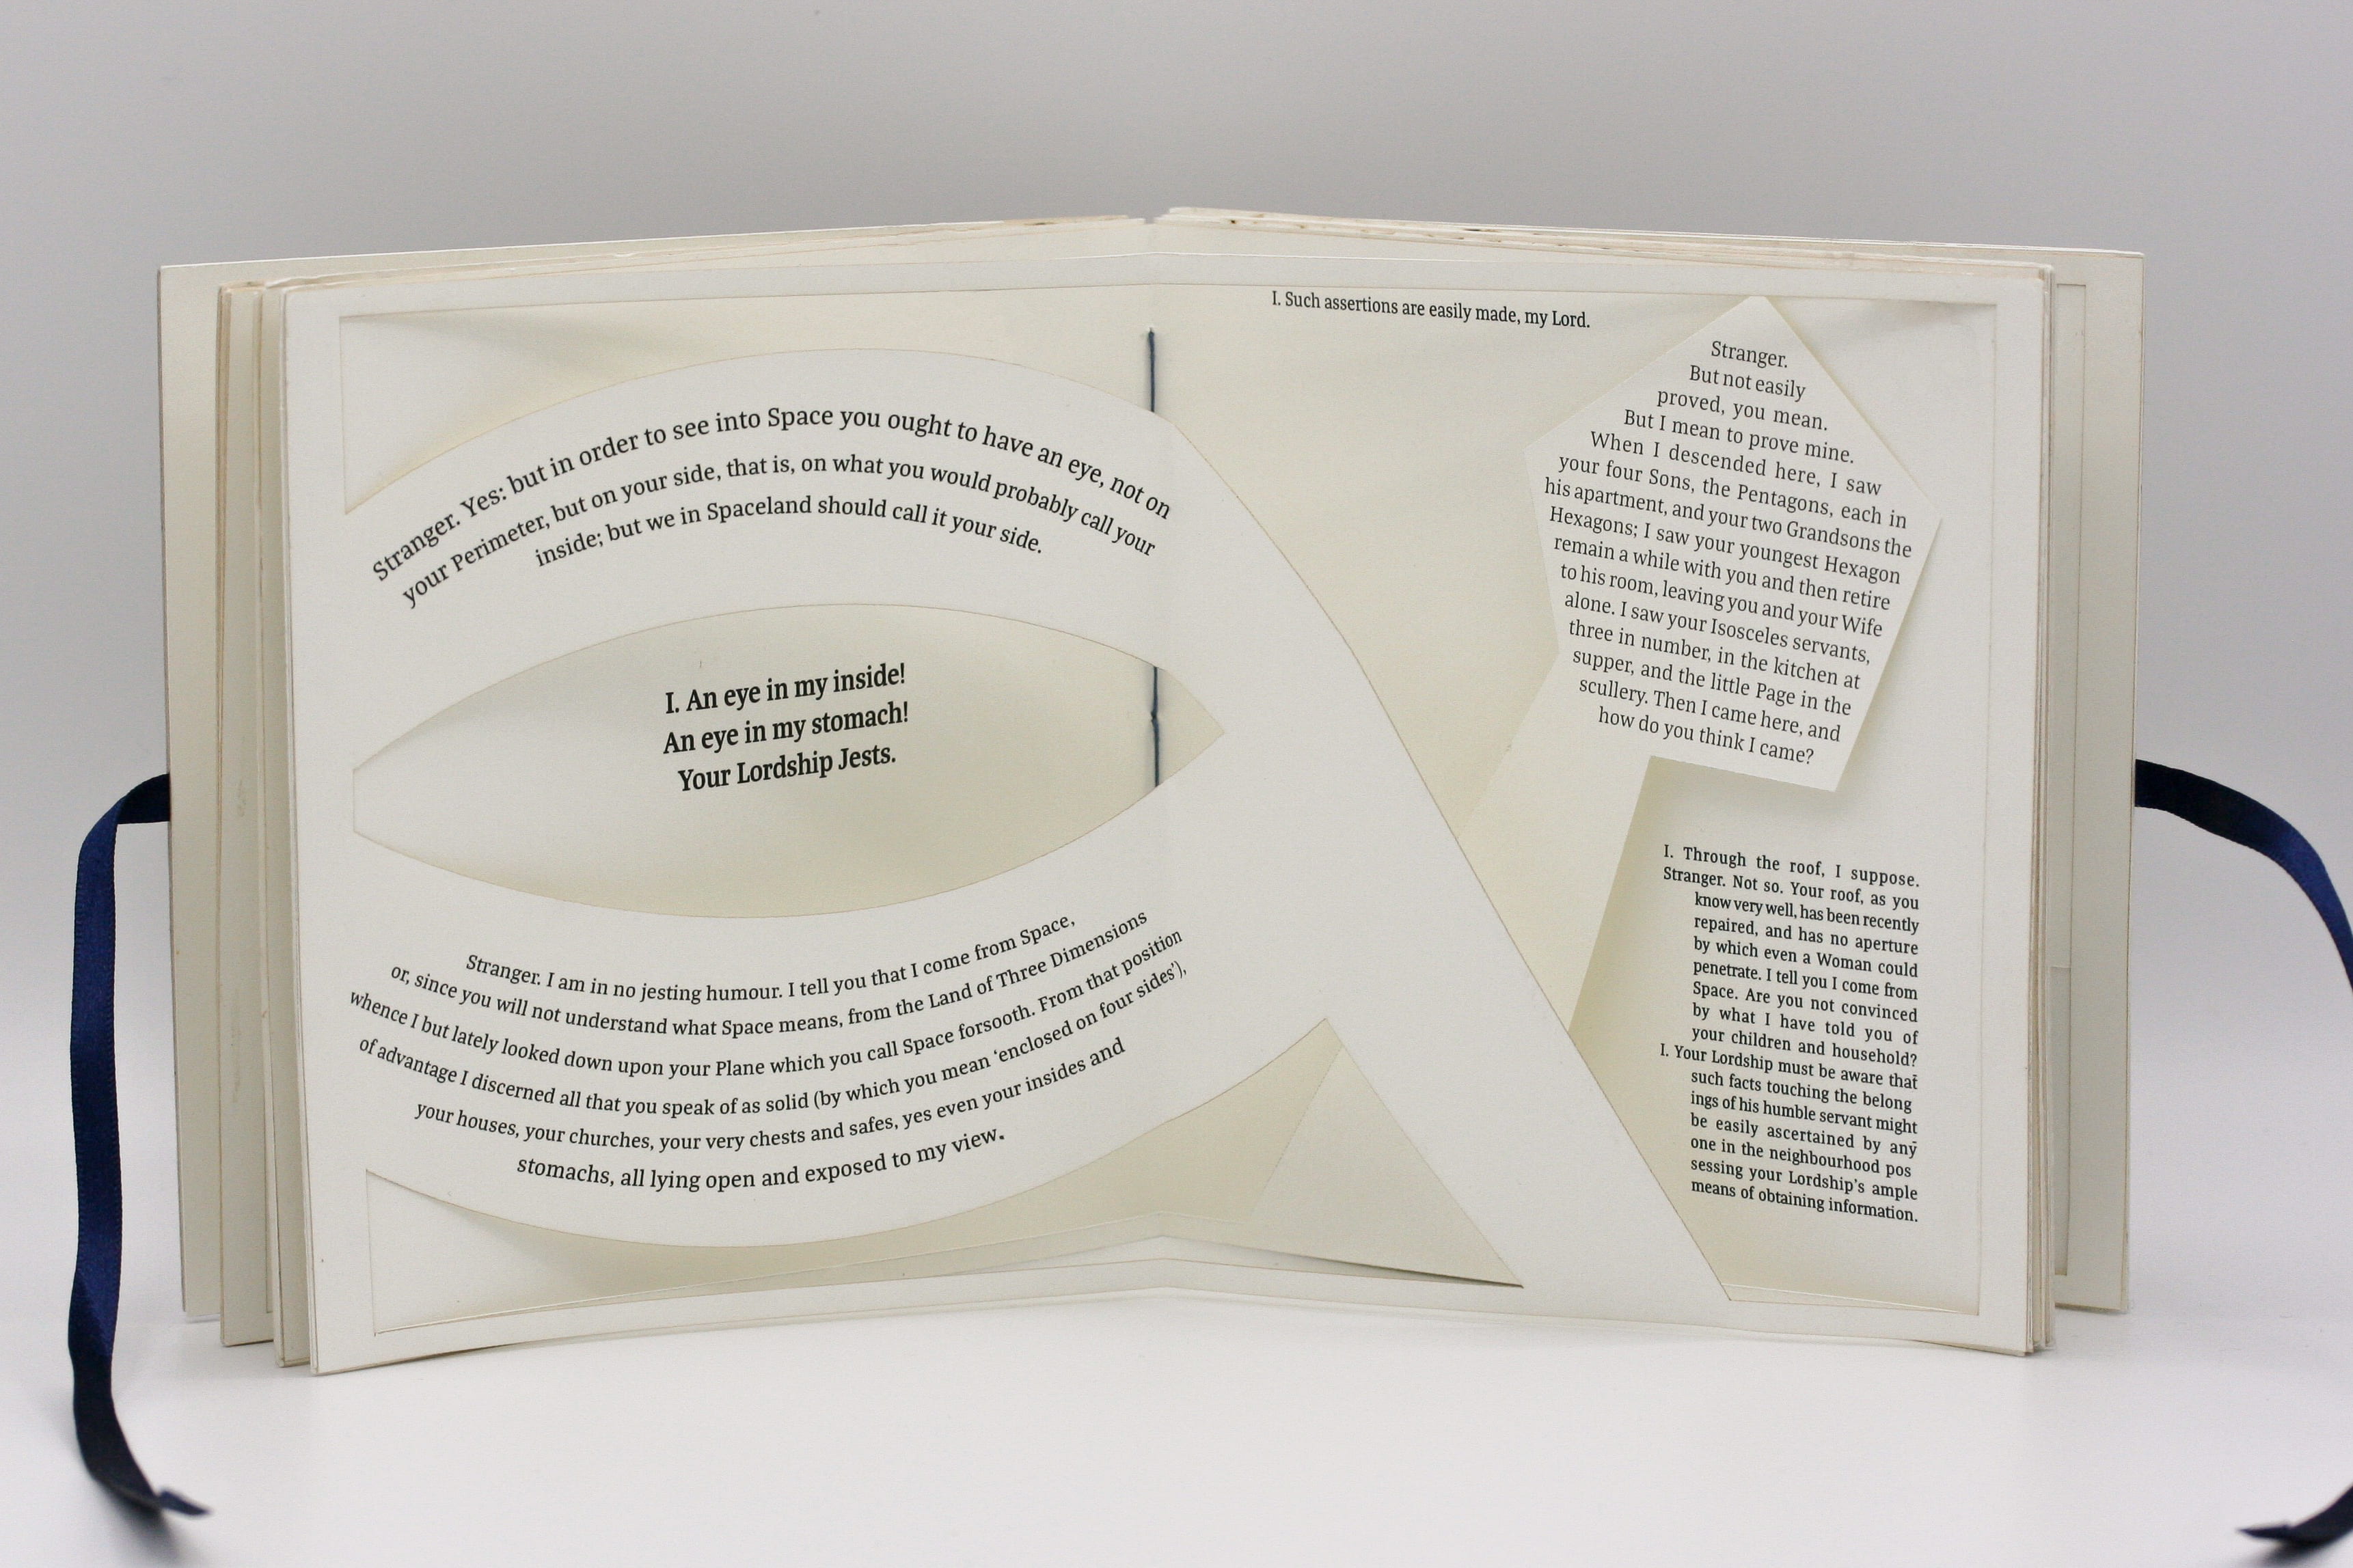 View of 3D elements on the books pages.